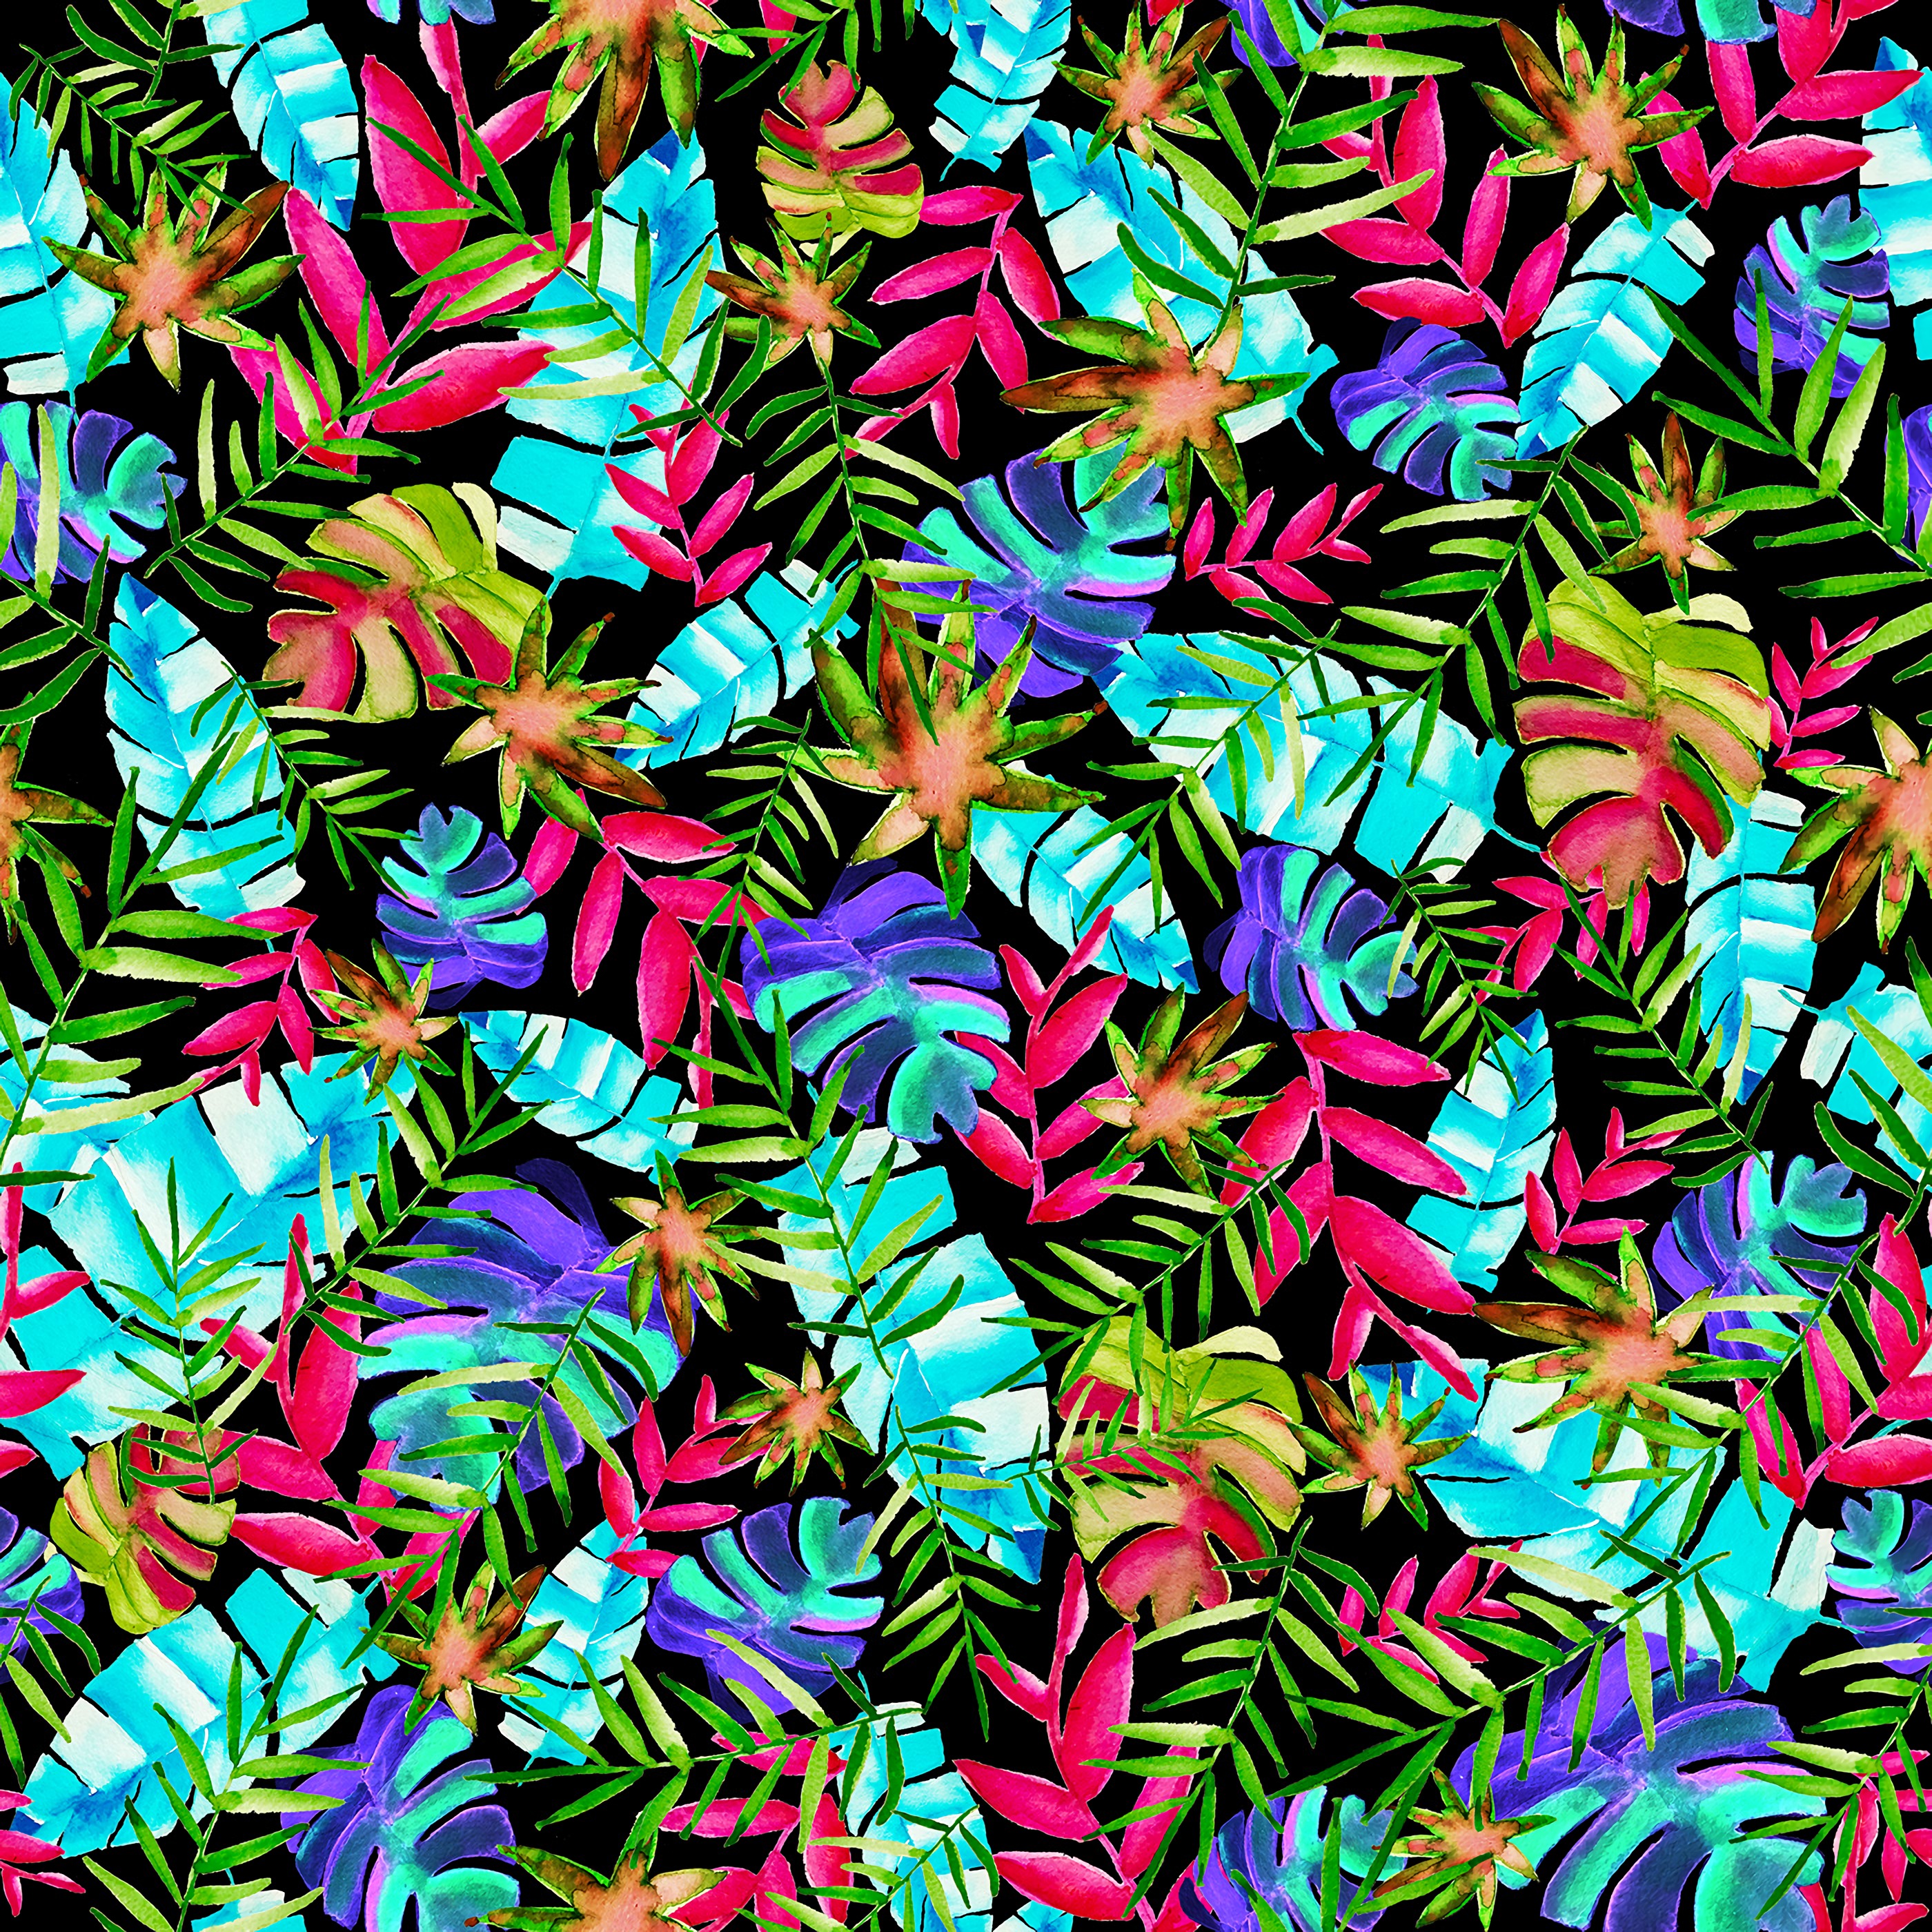 plants, leaves, multicolored, motley, pattern, texture, textures